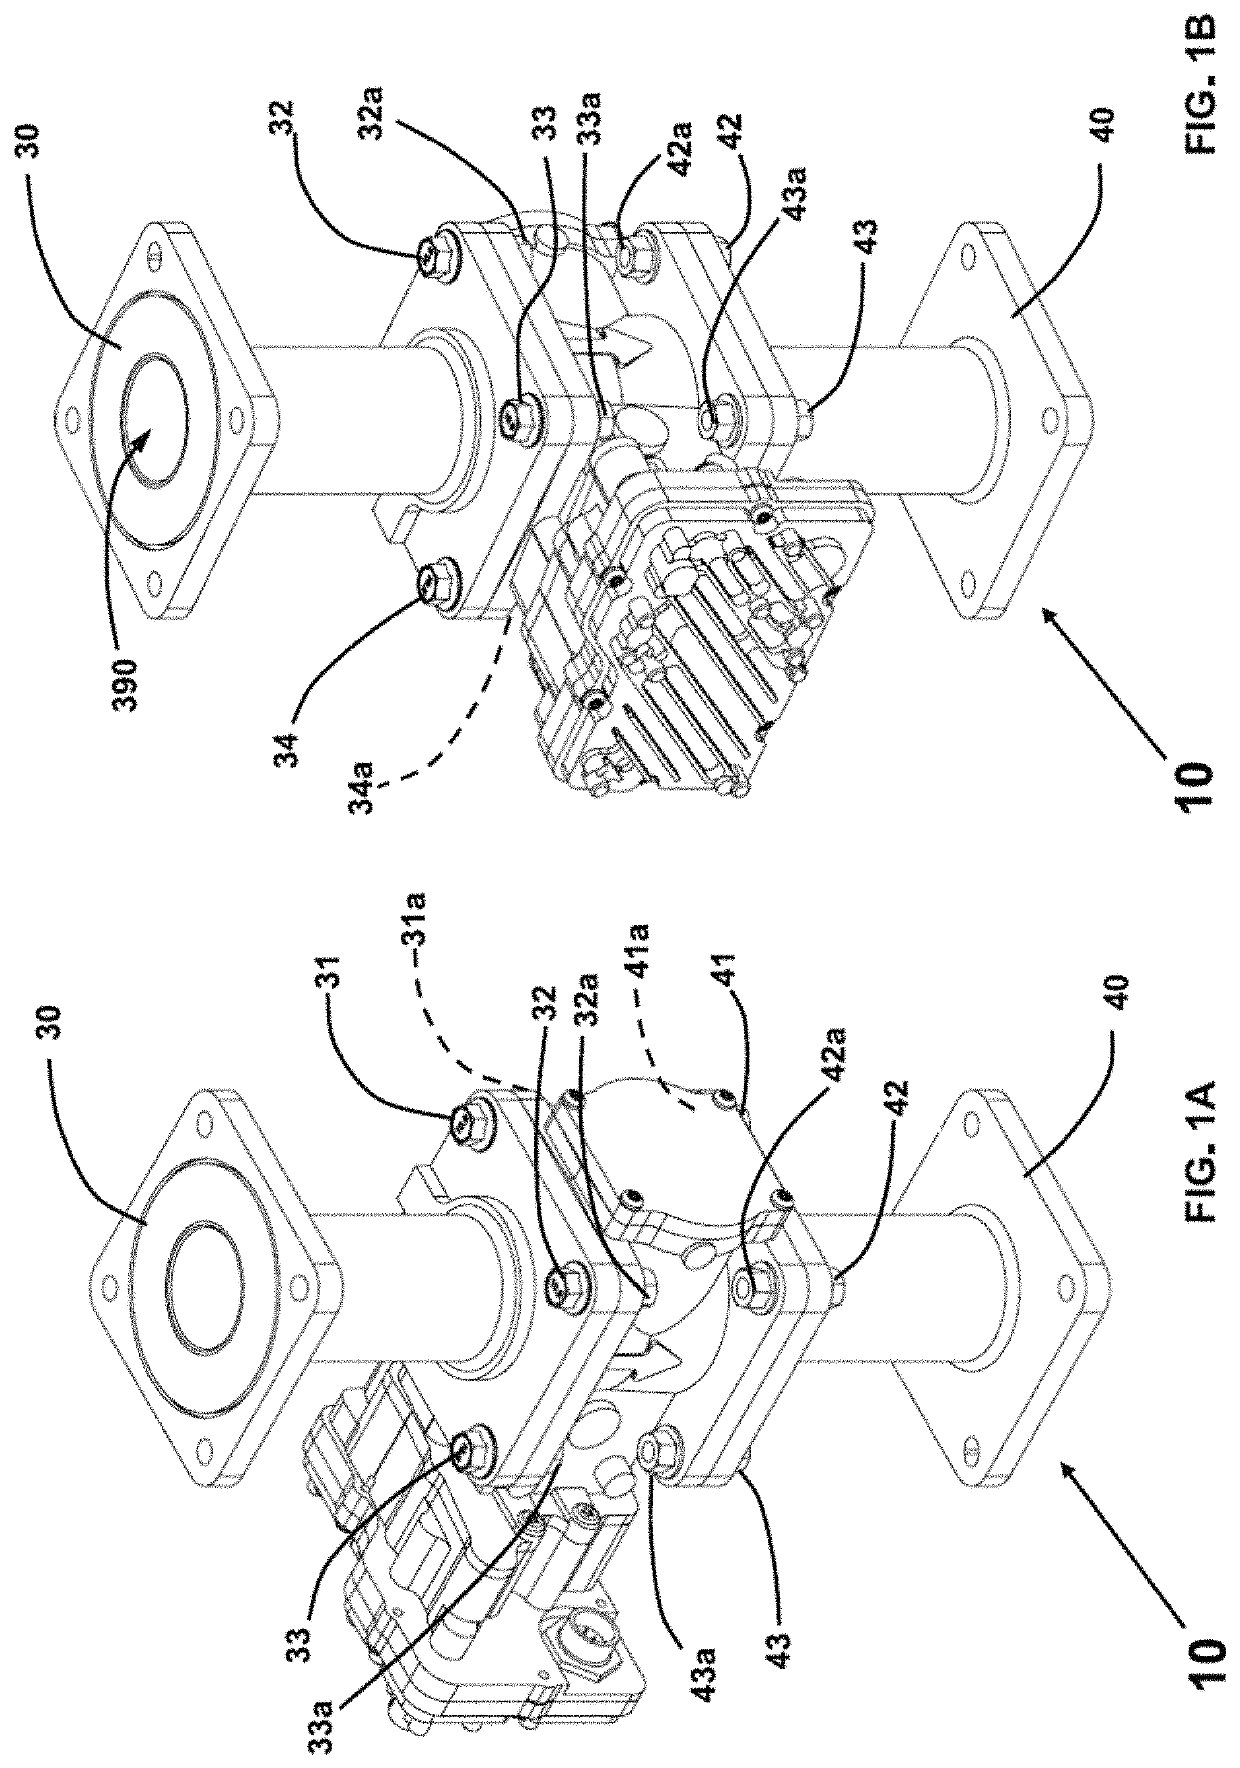 Mass-flow throttle for large natural gas engines